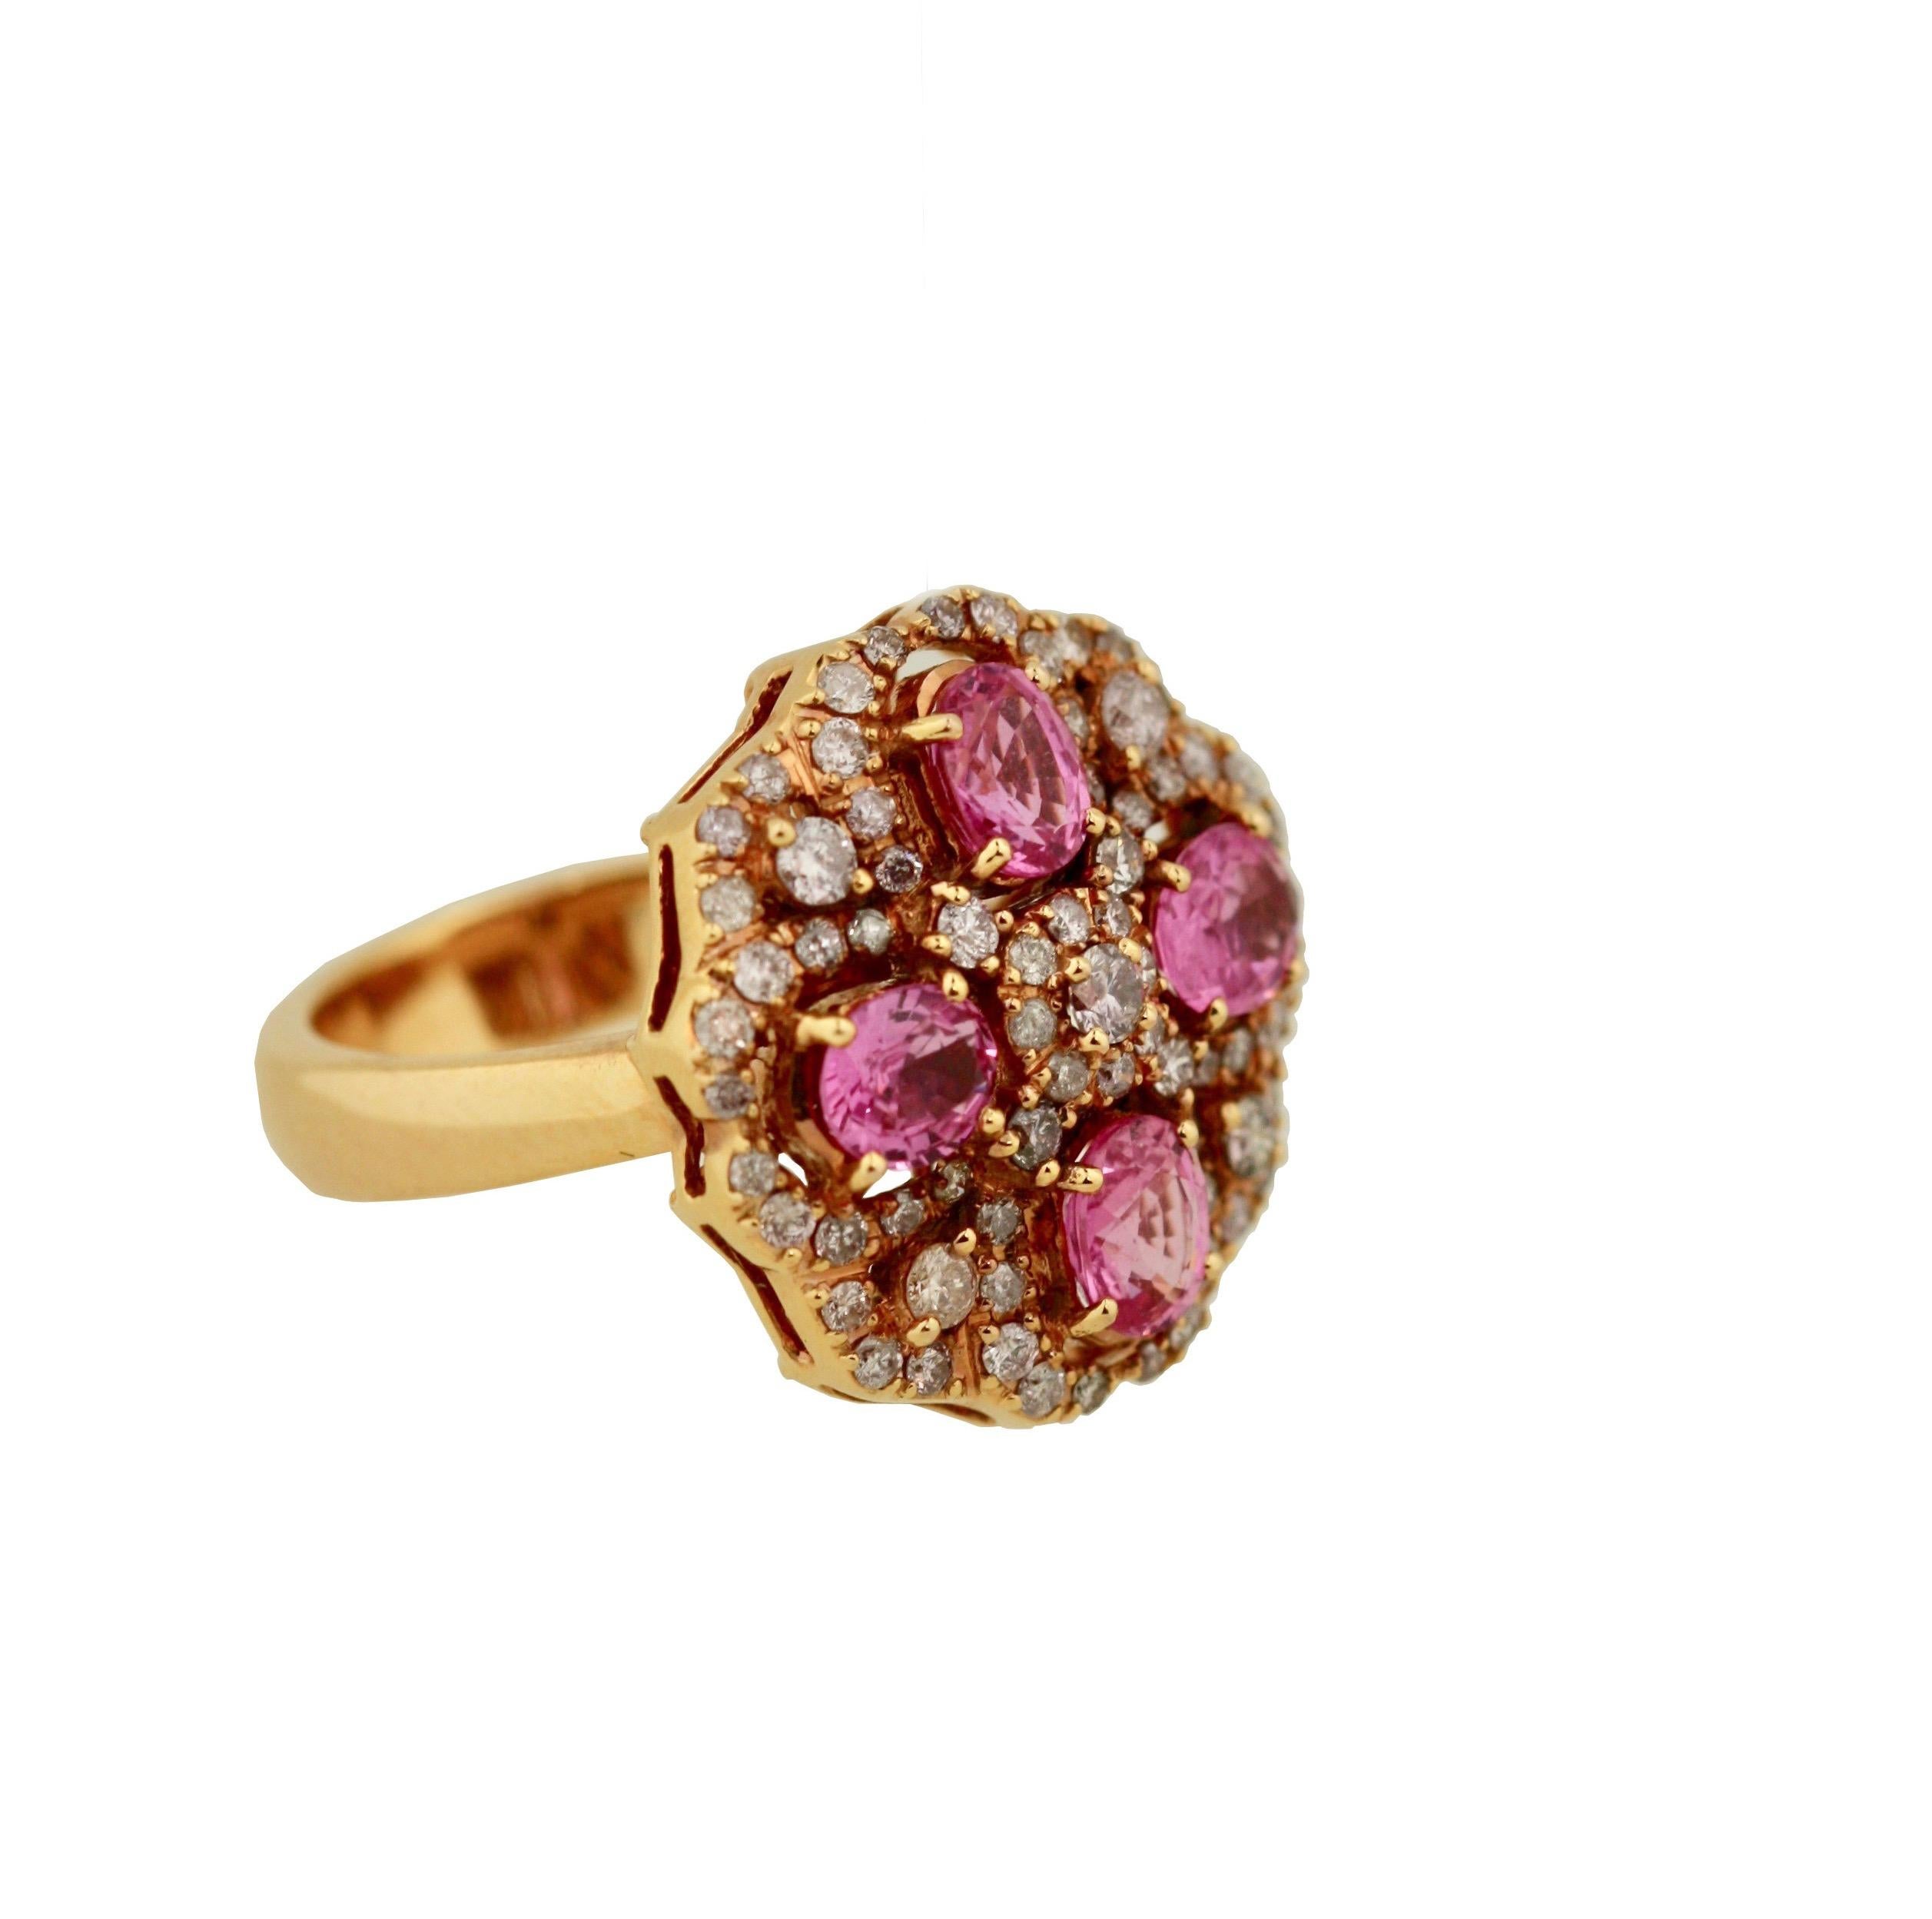 Vintage Gold, Pink Sapphire and Diamond Ring, 
diamonds weighing approximately 1.0 cts, 
pink sapphires weighing approx. 2.61 cts
mounted in 18kt yellow gold 
11.9 grams (gross) 
size 6 1/2 